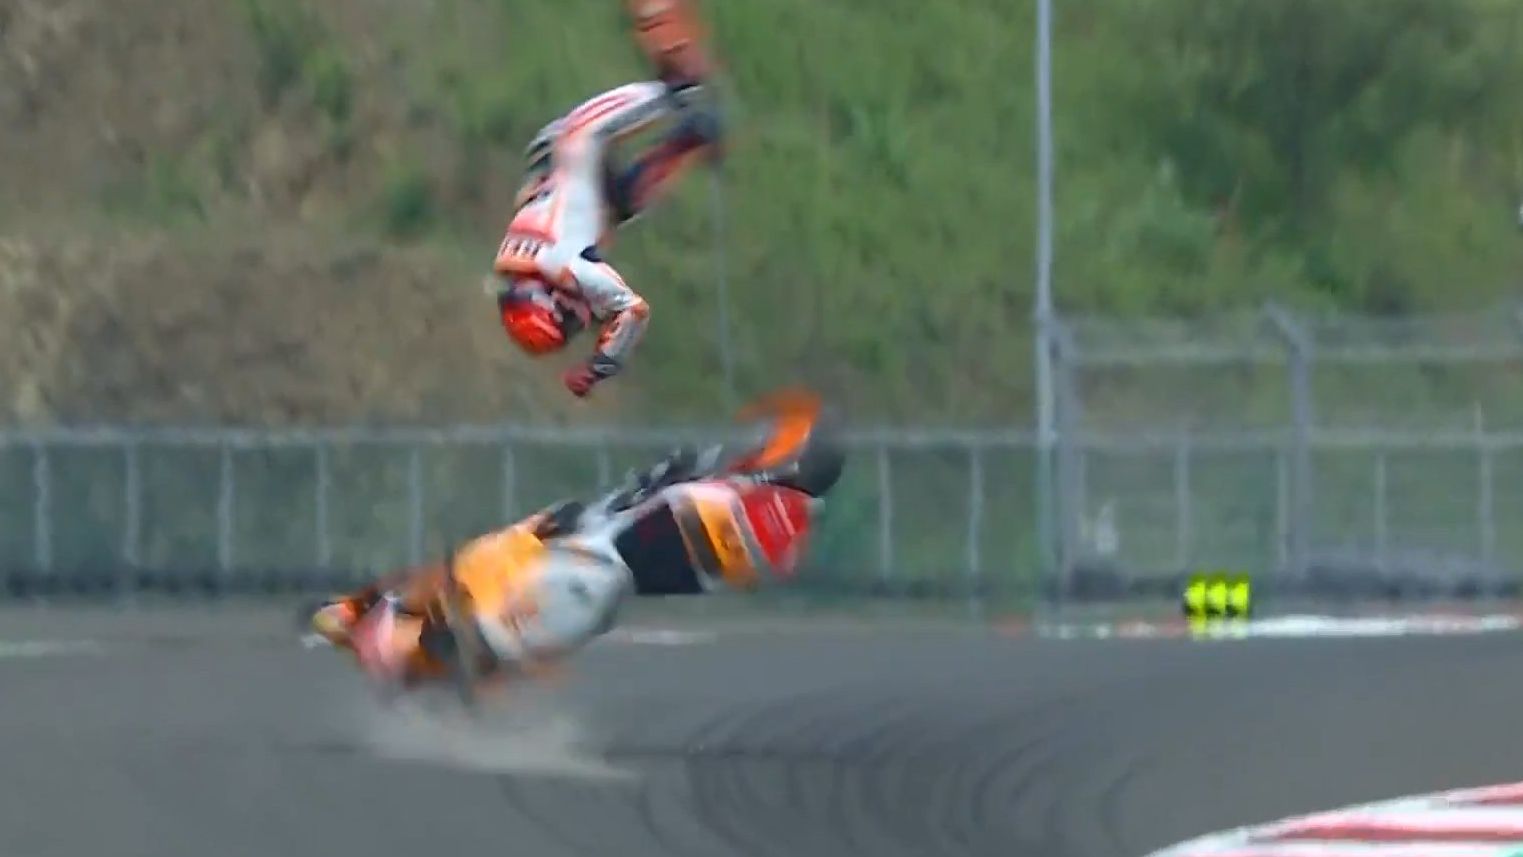 Marc Marquez experiences a massive highside accident which sees him flung into the air.